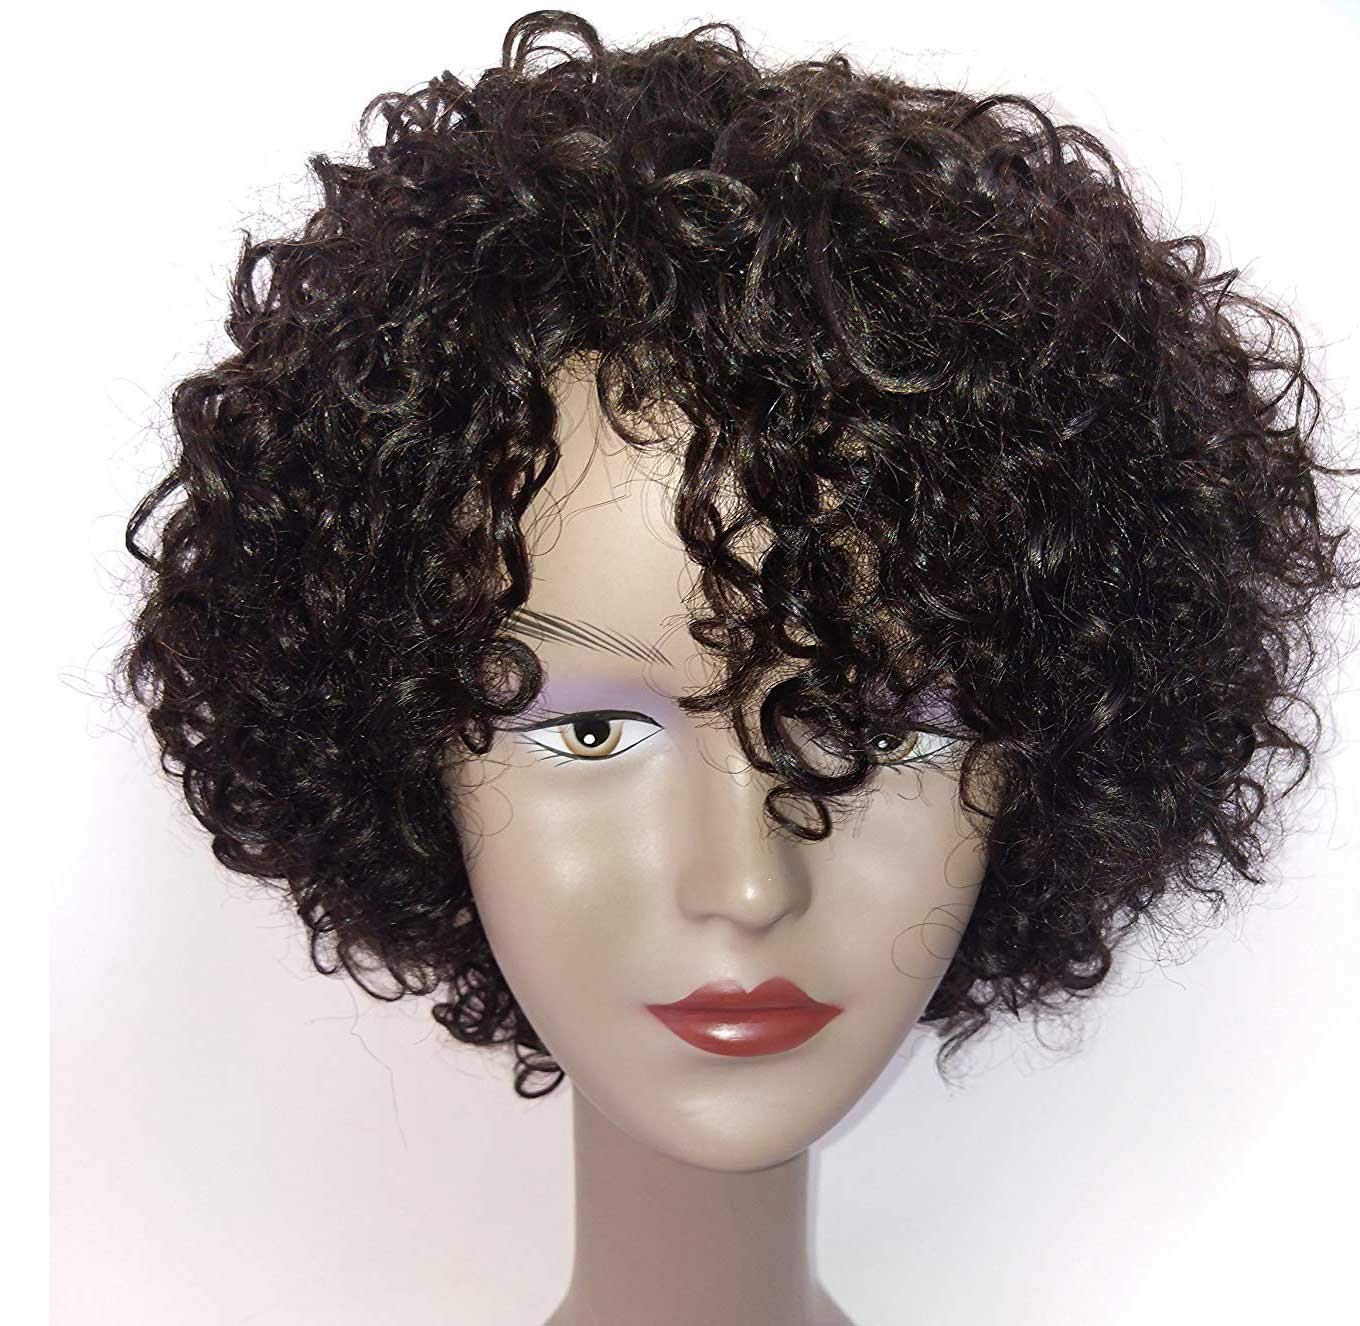 natural wigs Cheaper Than Retail Price> Buy Clothing, Accessories and ...